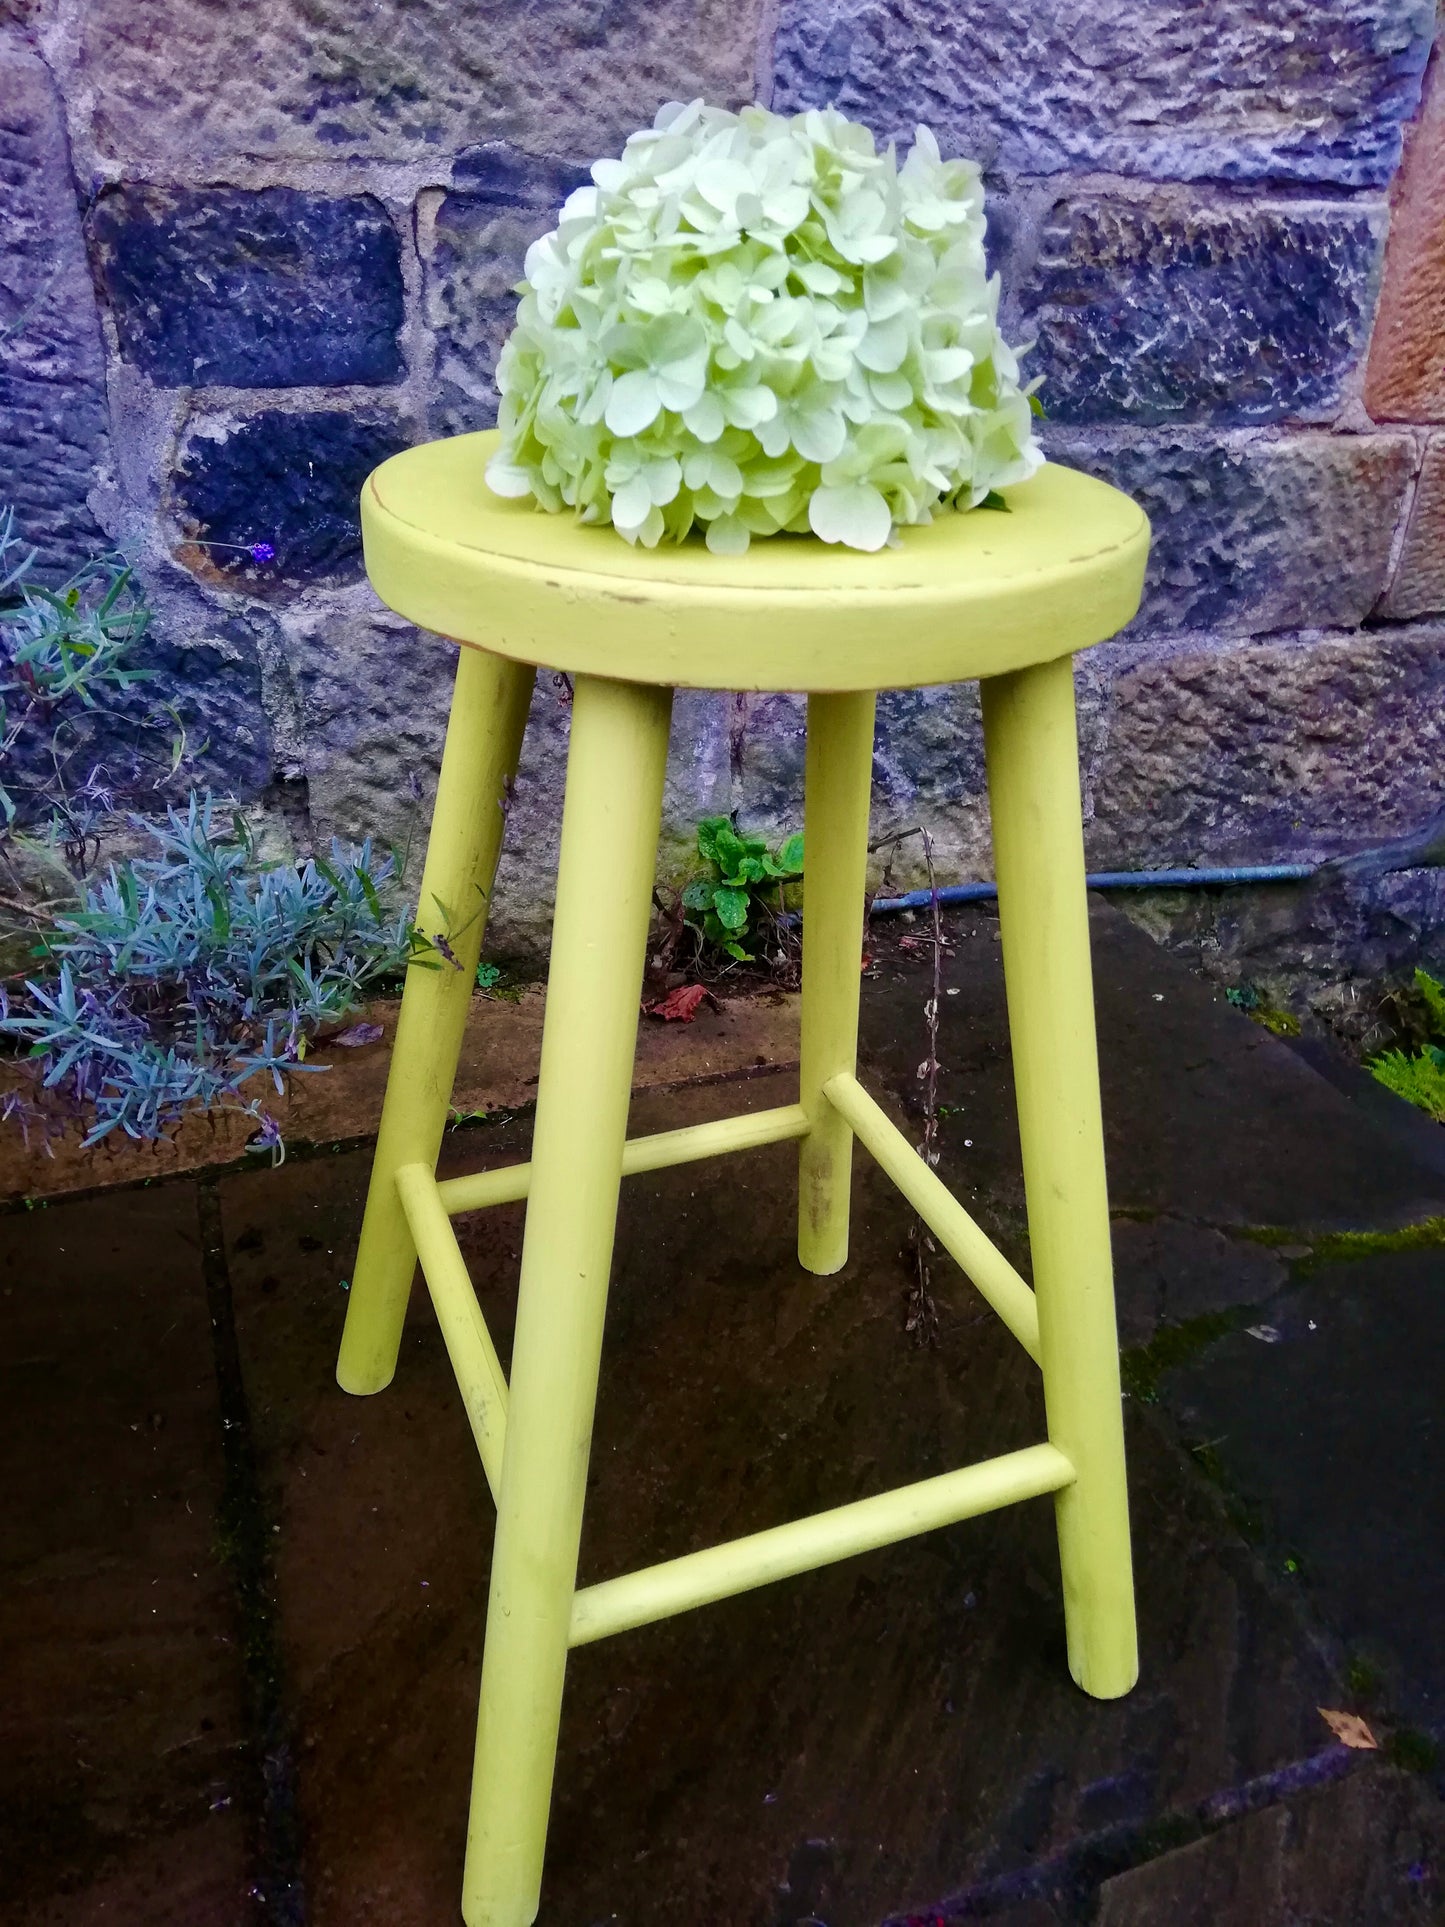 Vintage wooden stool in vibrant yellow